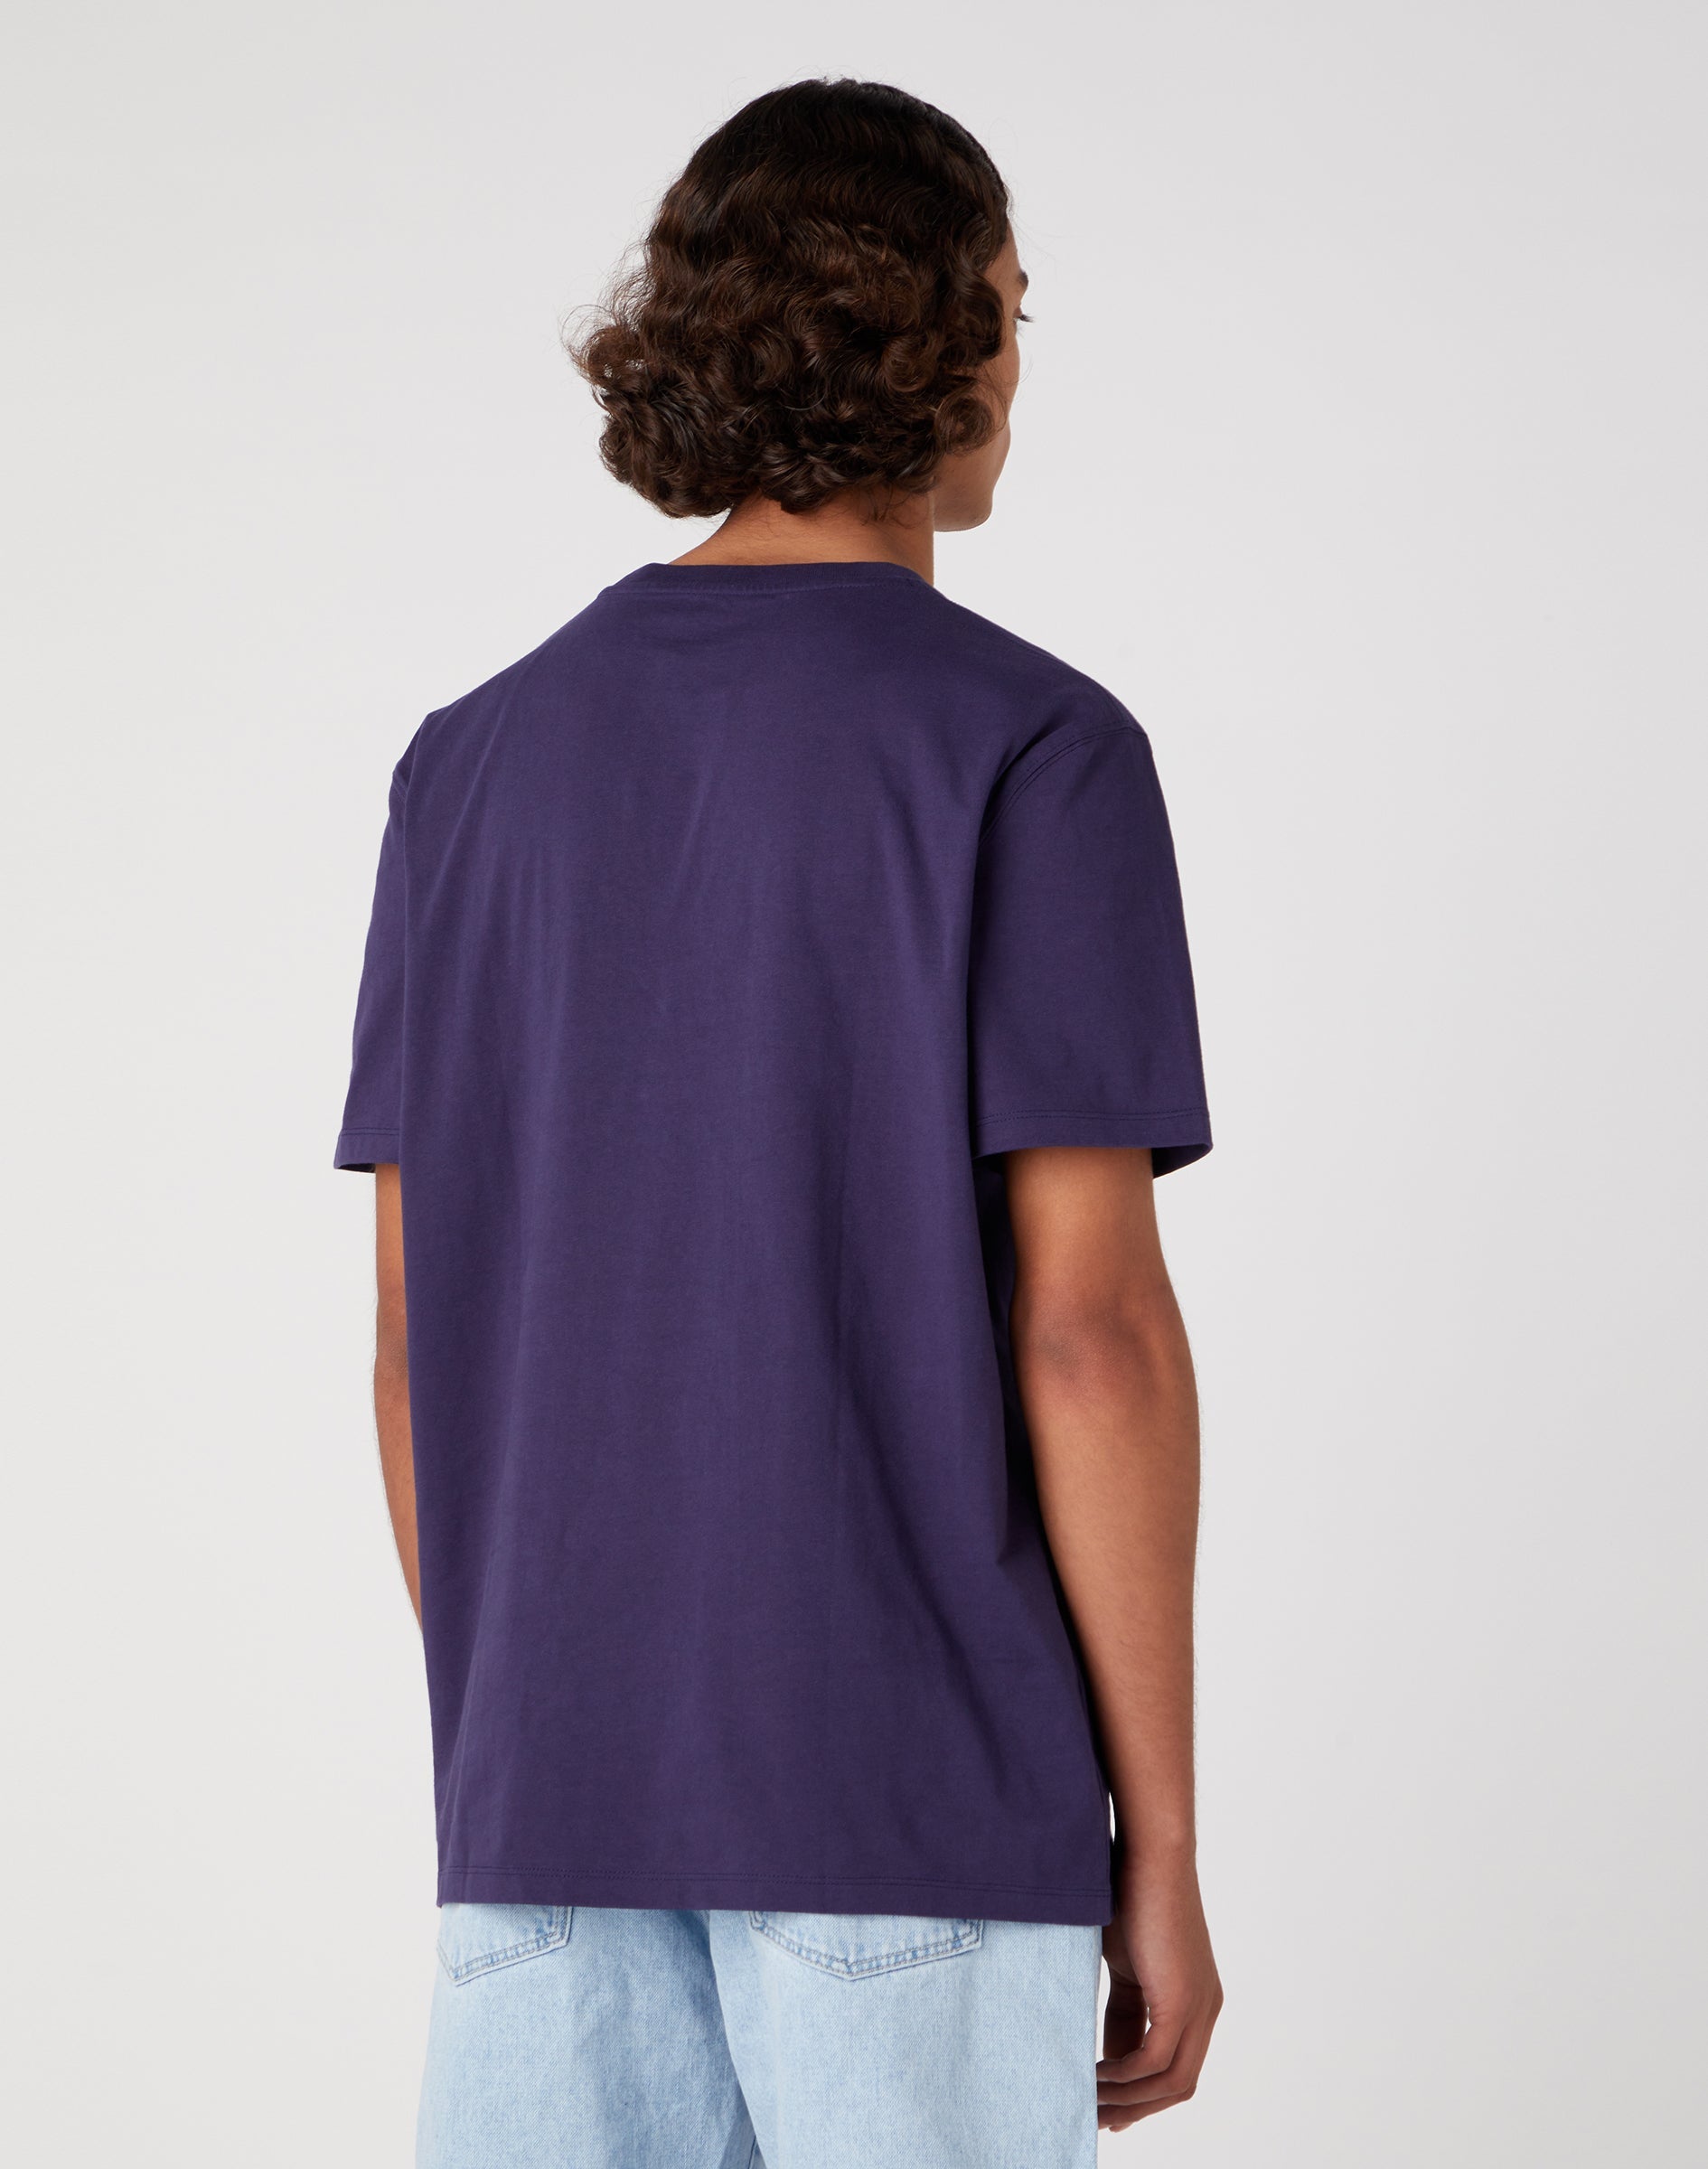 Branded Tee in Eclipse T-Shirts Wrangler   